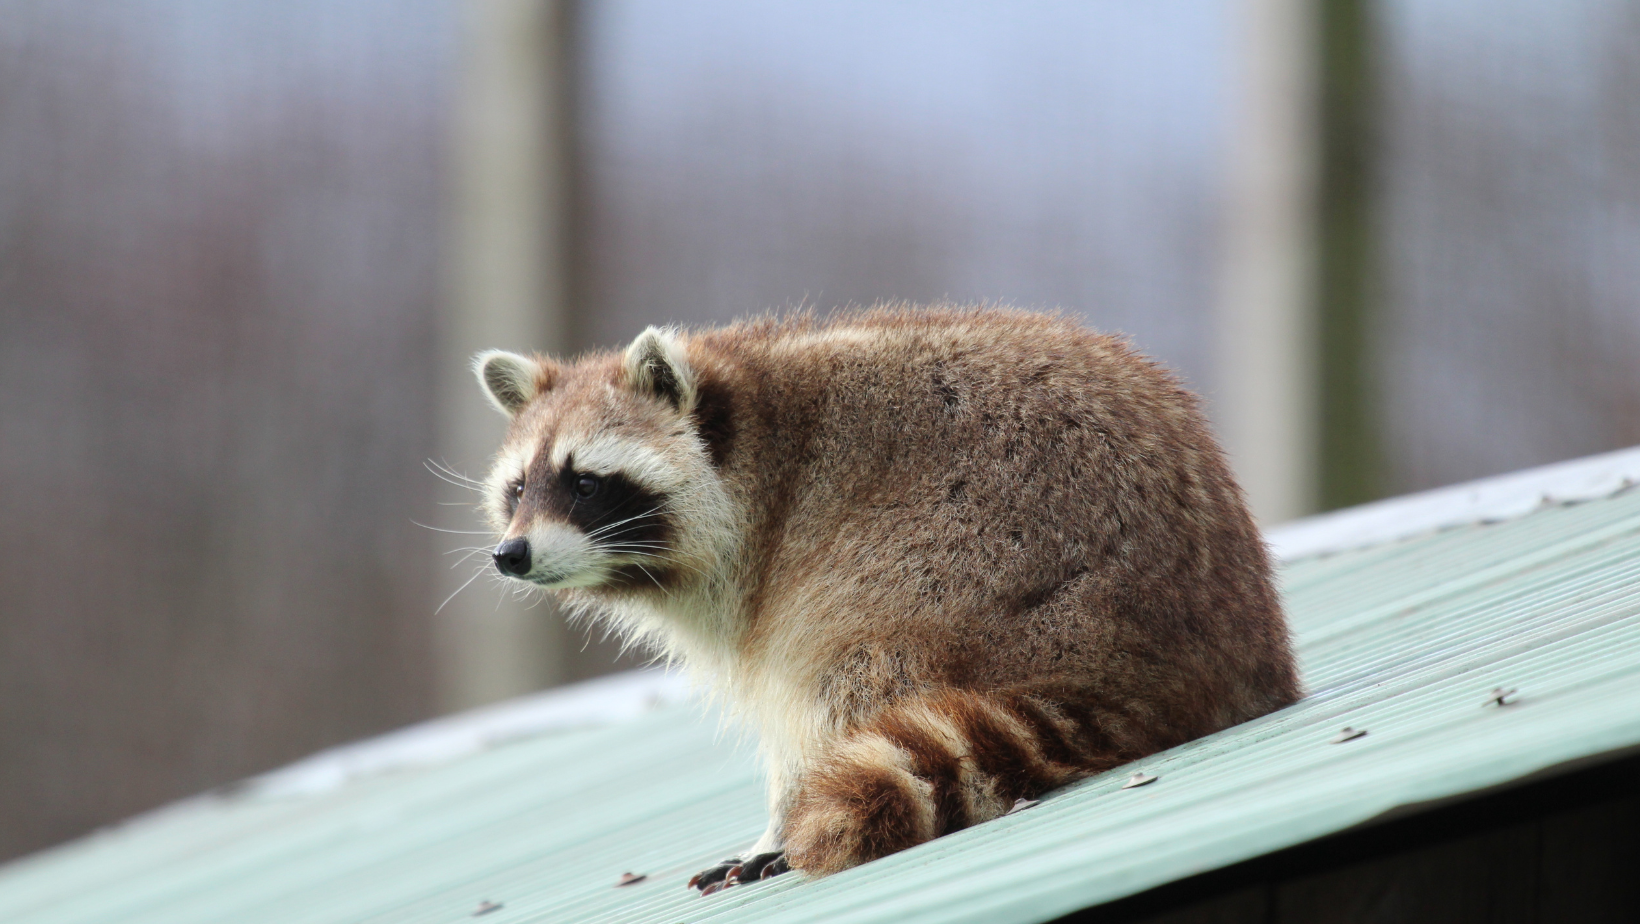 Racoon on a roof